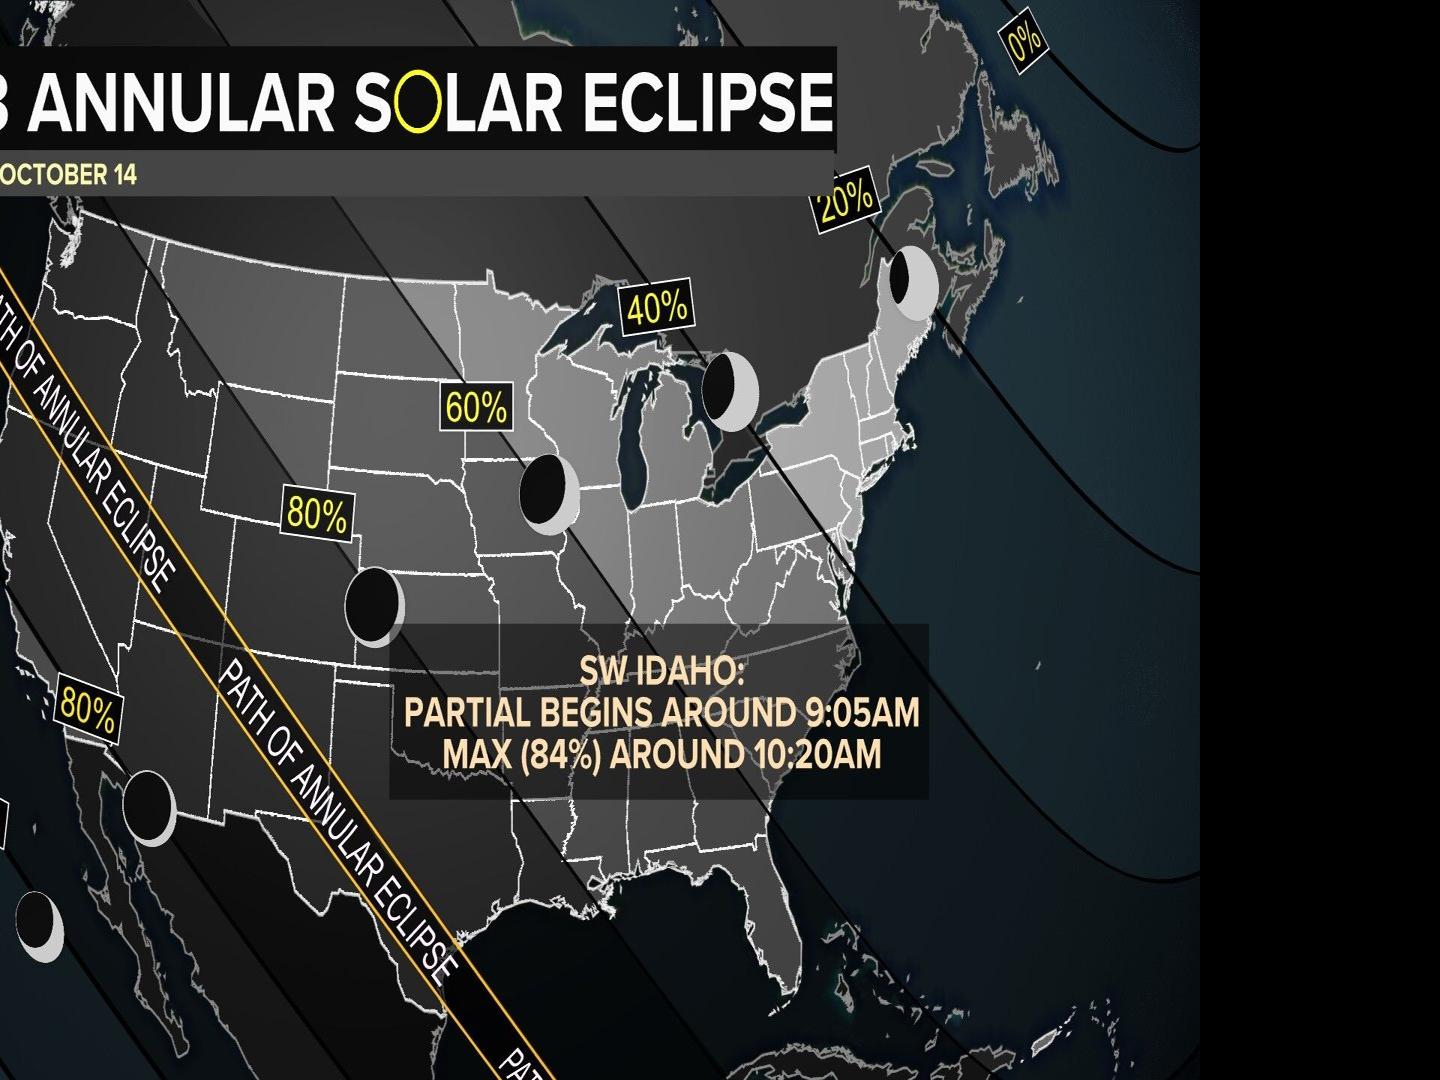 Weekend rain may affect solar eclipse viewing